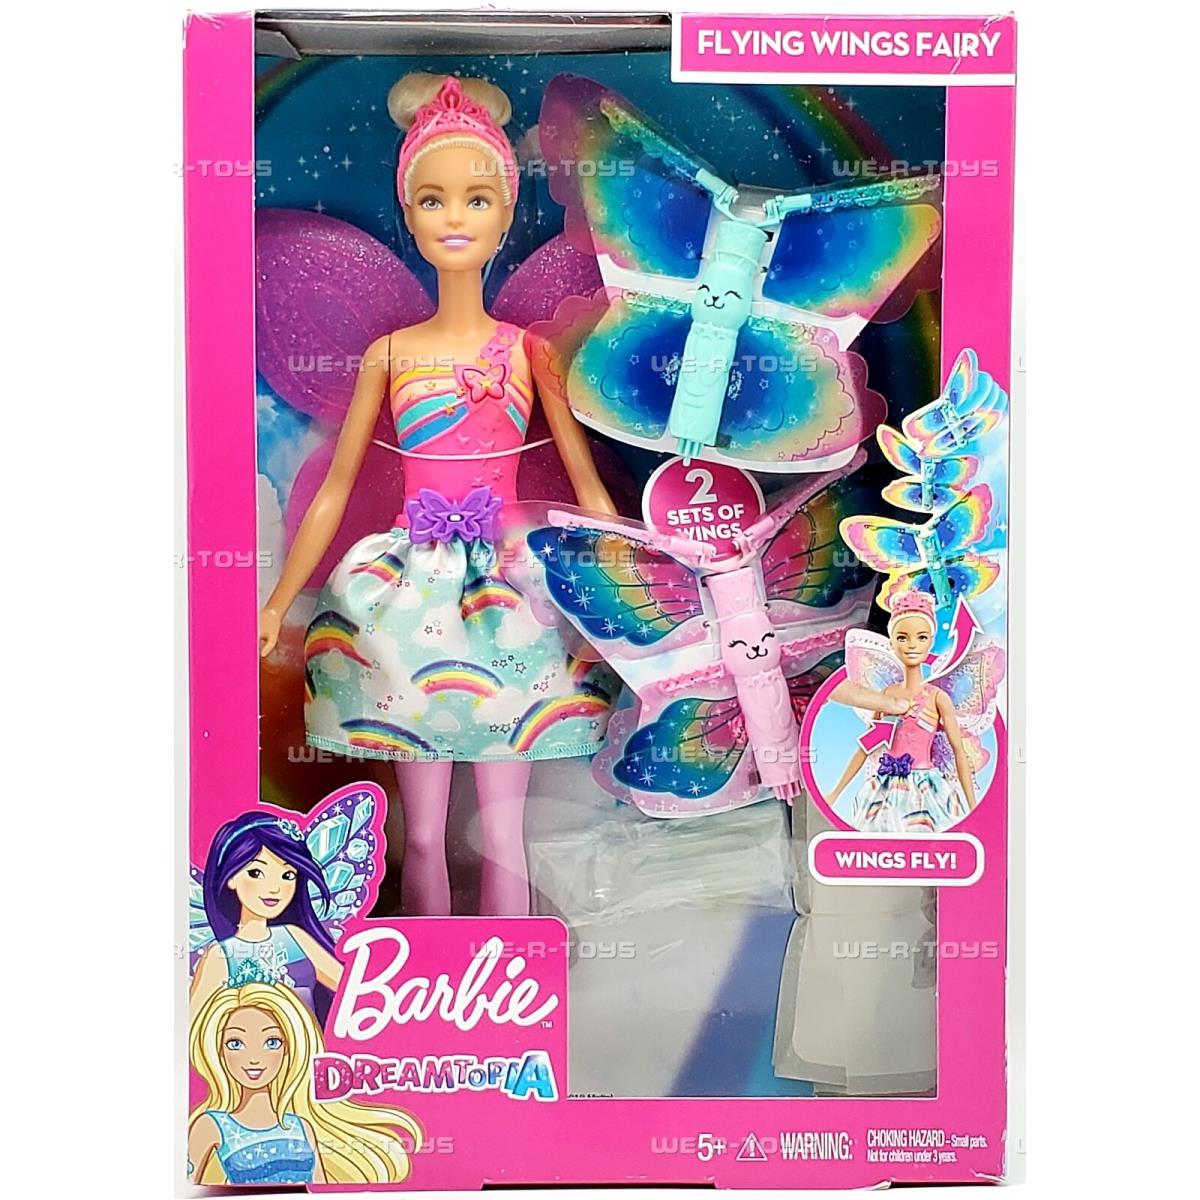 Barbie Dreamtopia Fairy Doll with Flying Wings Blonde 2018 Mattel FRB08